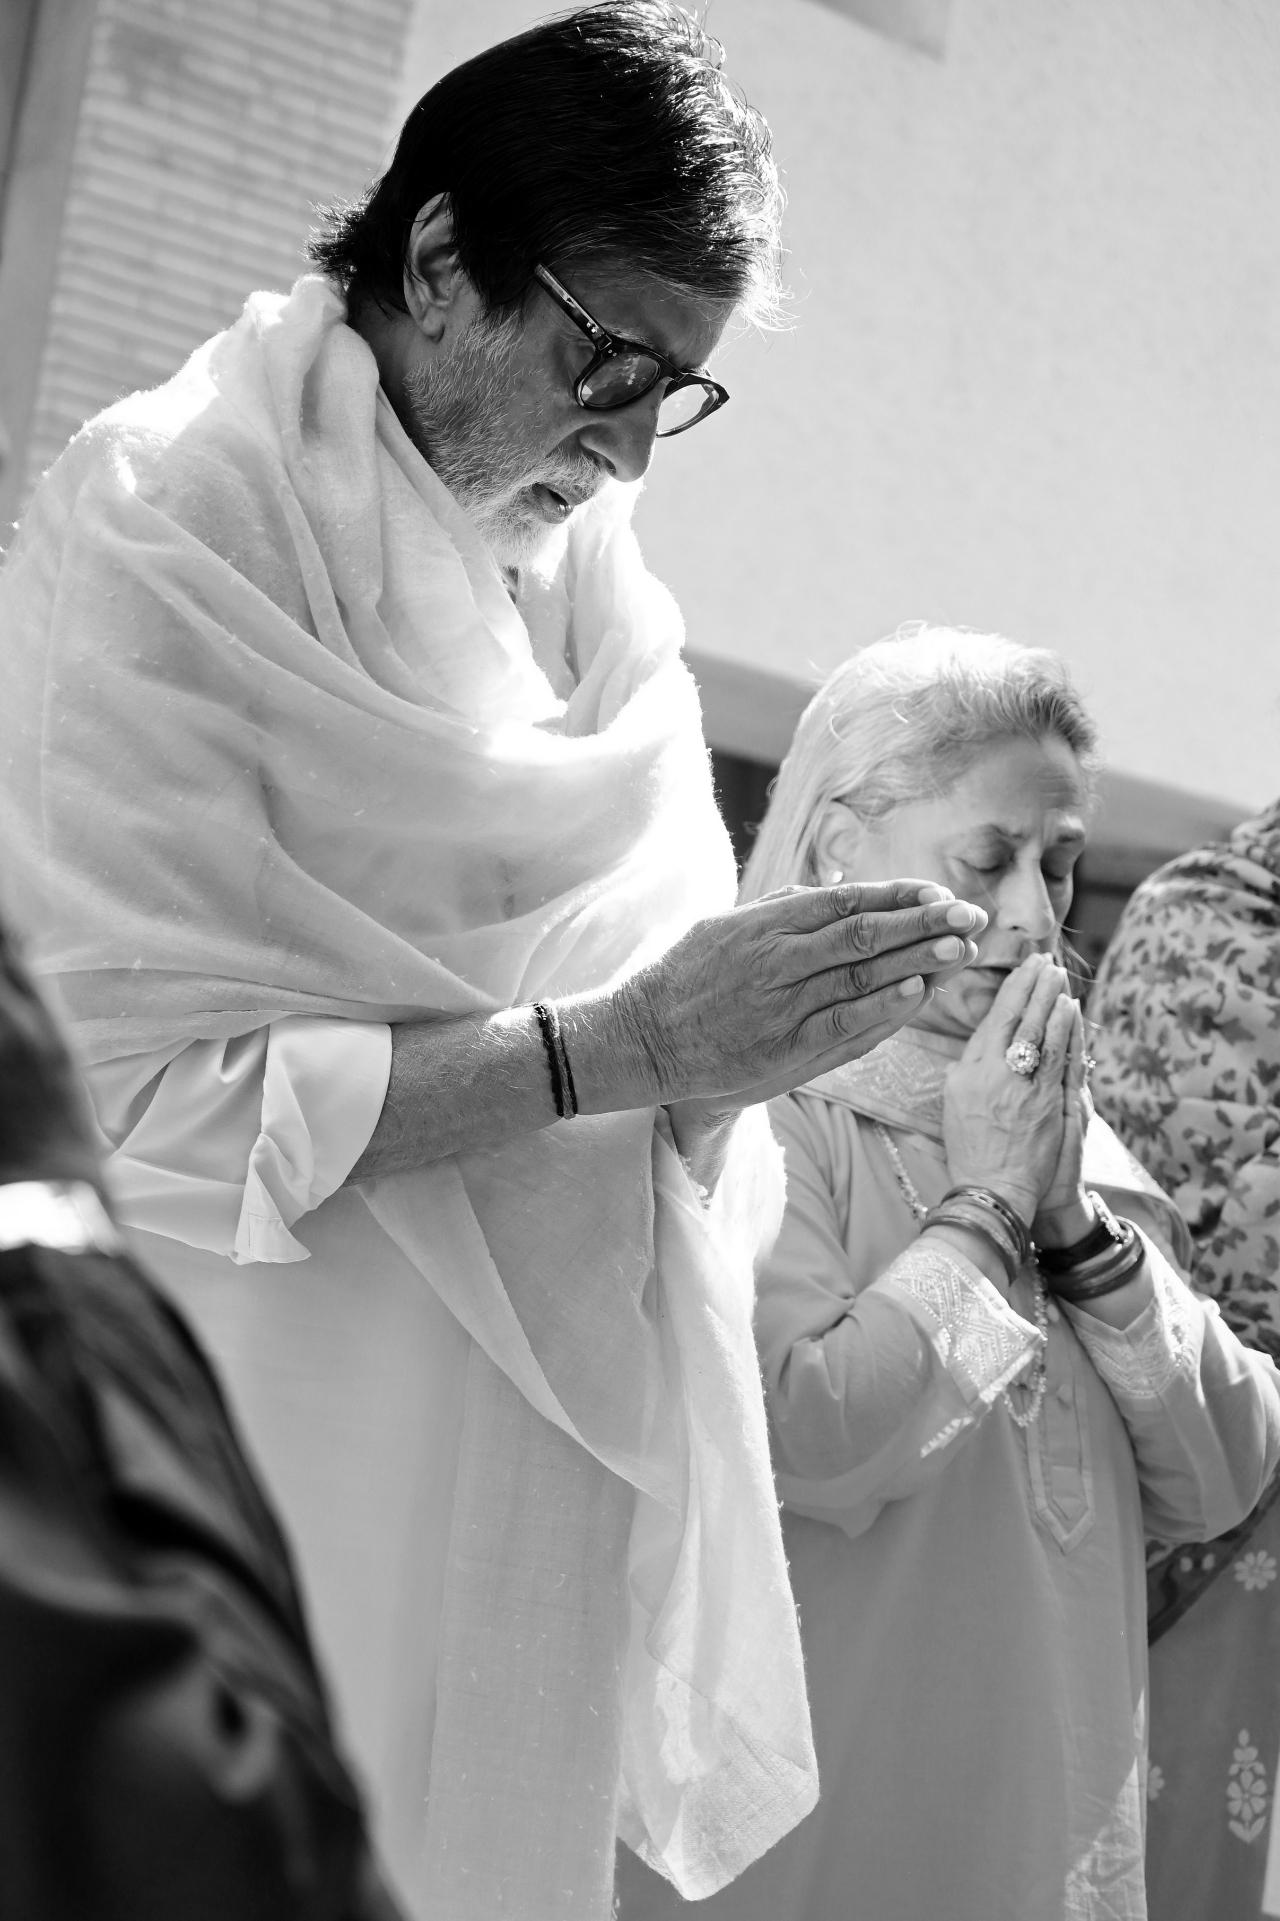 Amitabh Bachchan also shared a picture of himself bowing down in front of Goddess Saraswati. He also shared that Abhishek Bachchan was also born on Basant Panchami